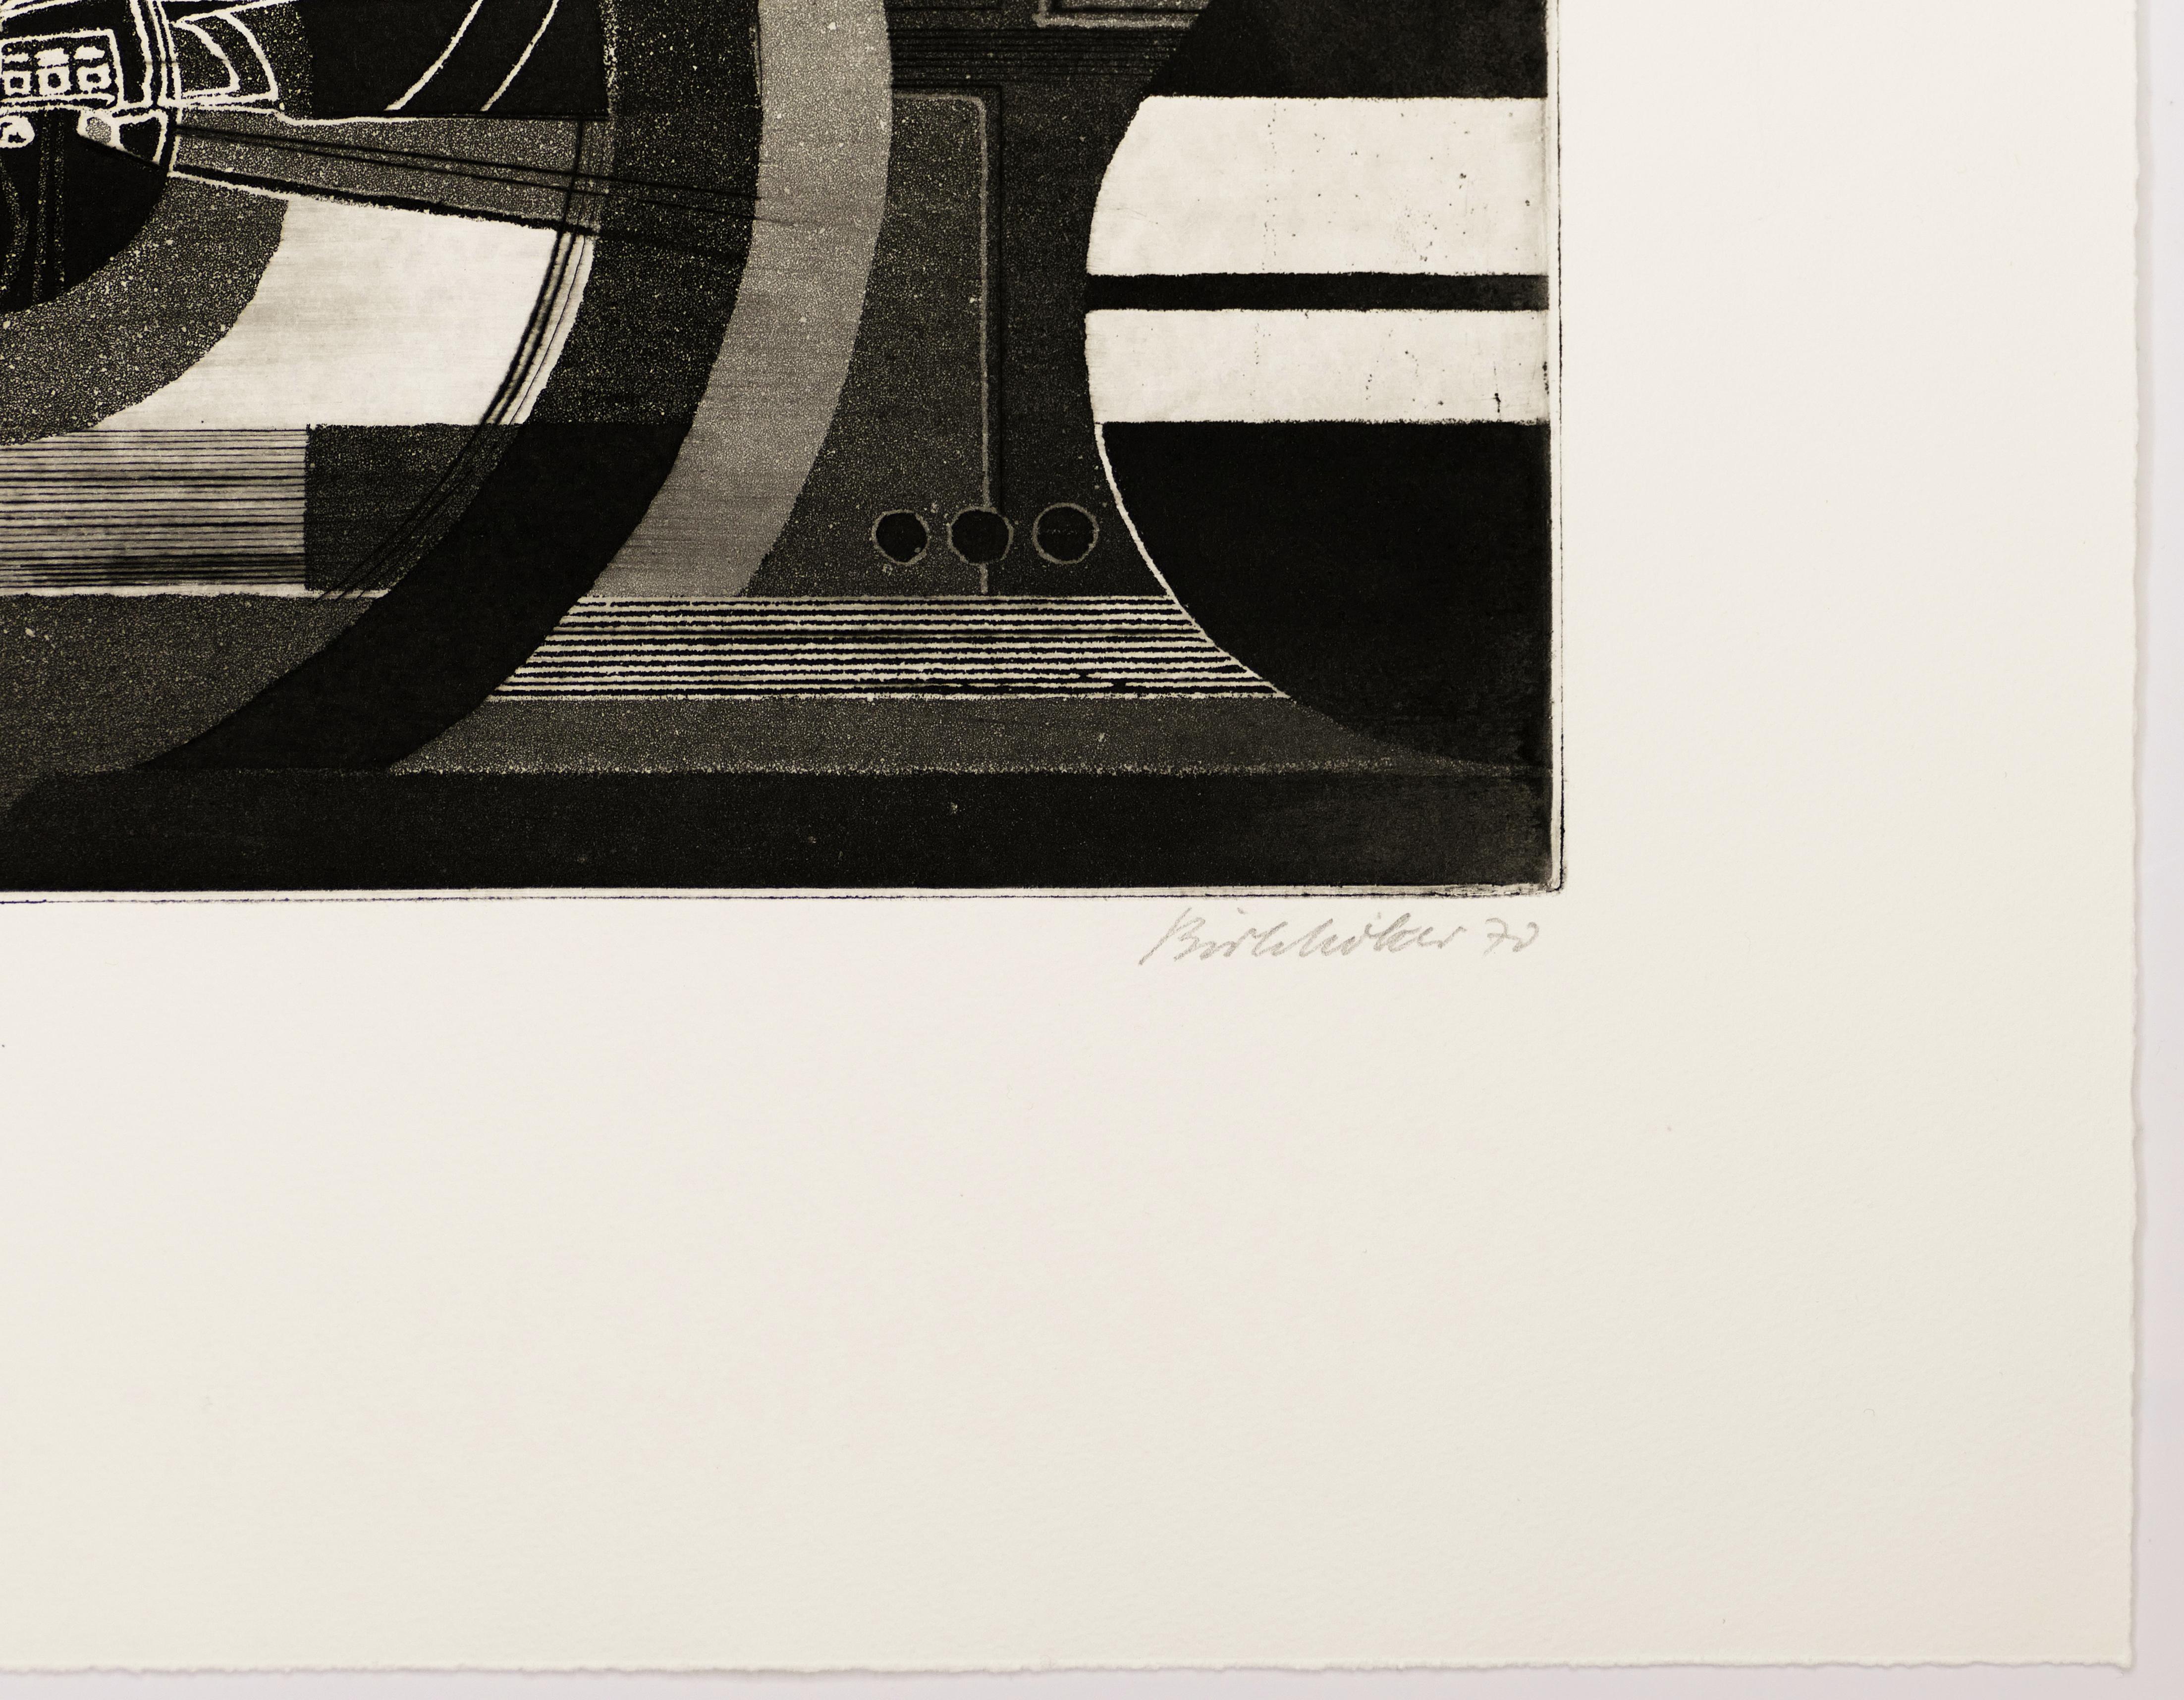 Abstract Composition - Original Etching and Aquatint by J. Birkholzer - 1970 - Print by Johannes Birkholzer